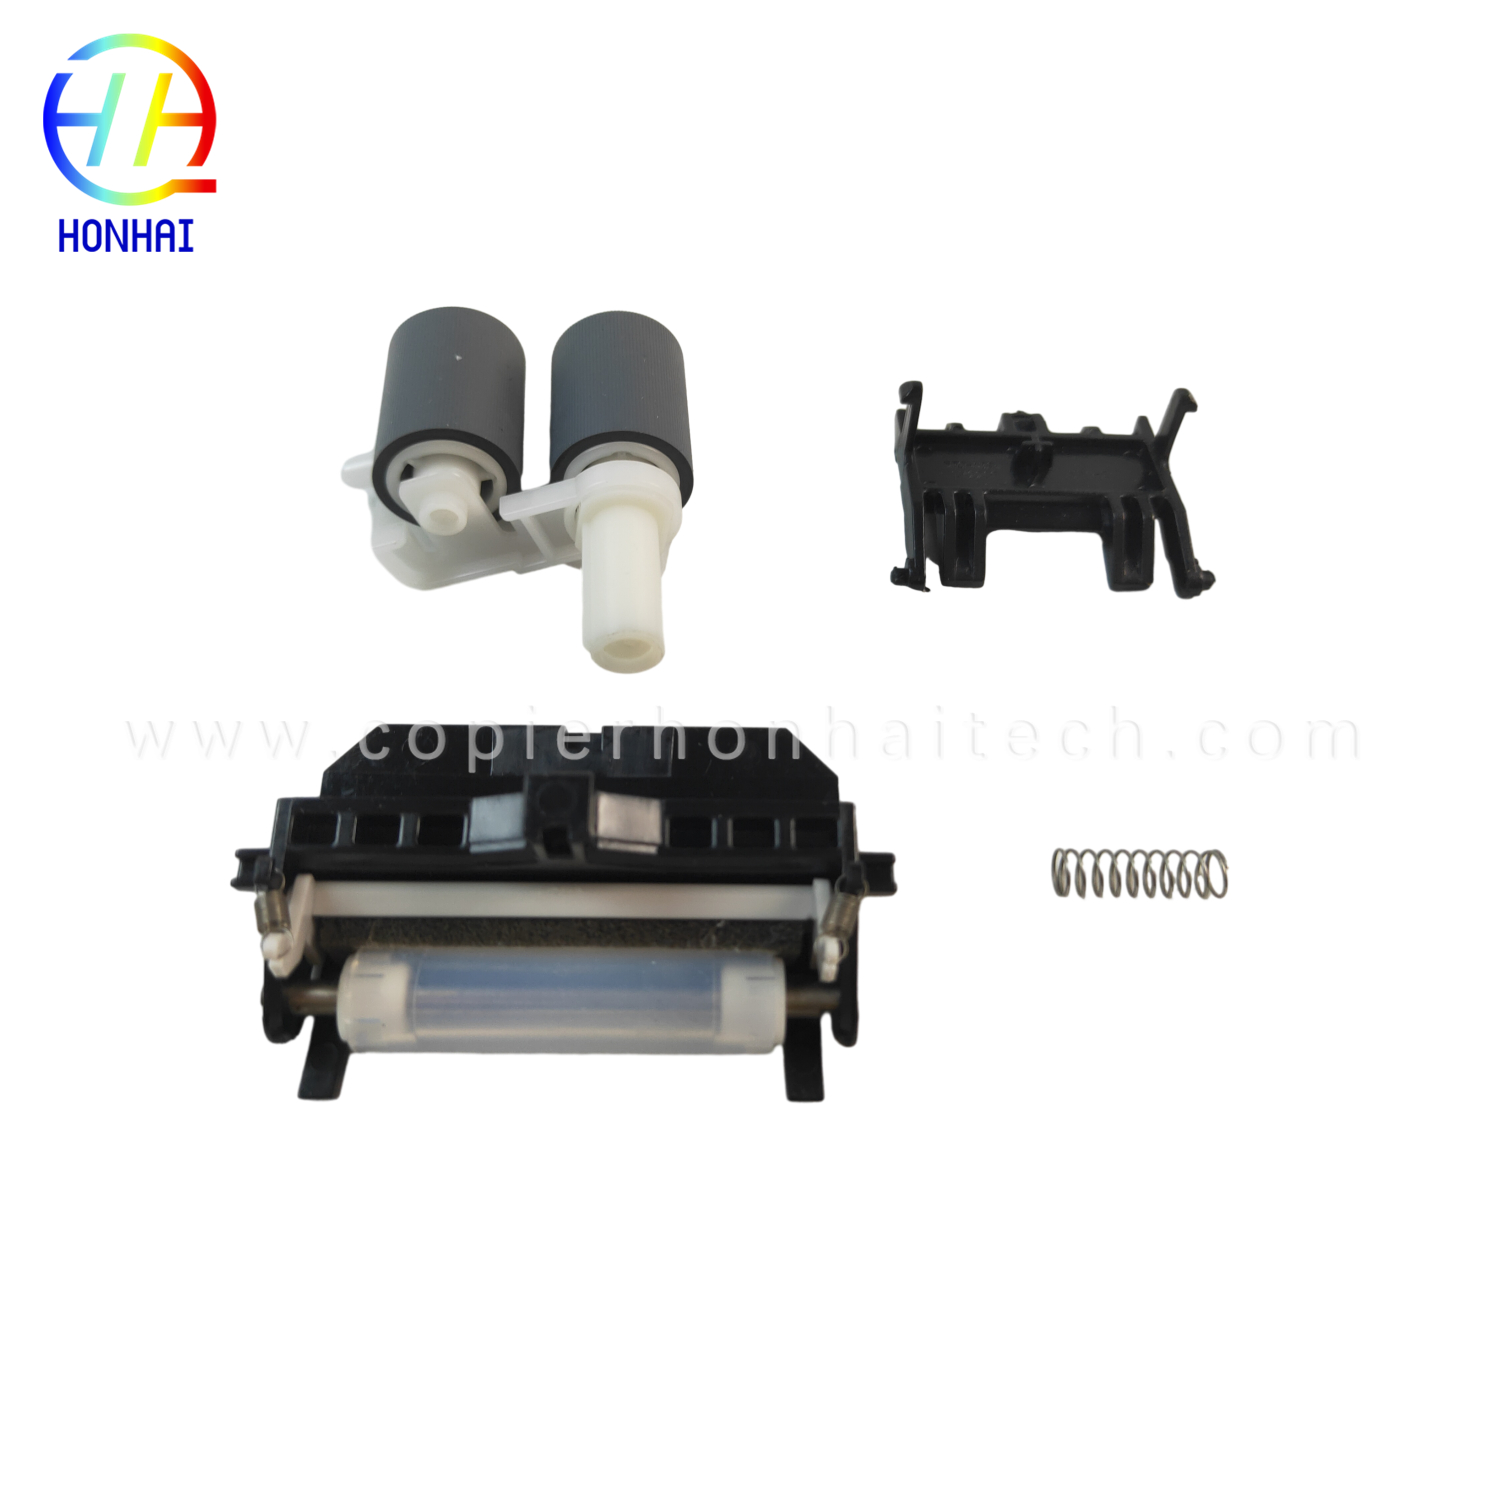 https://www.copierhonhaitech.com/pickup-feed-assembly-and-separation-pad-kit-for-brother-dcp-l2540dw-product/